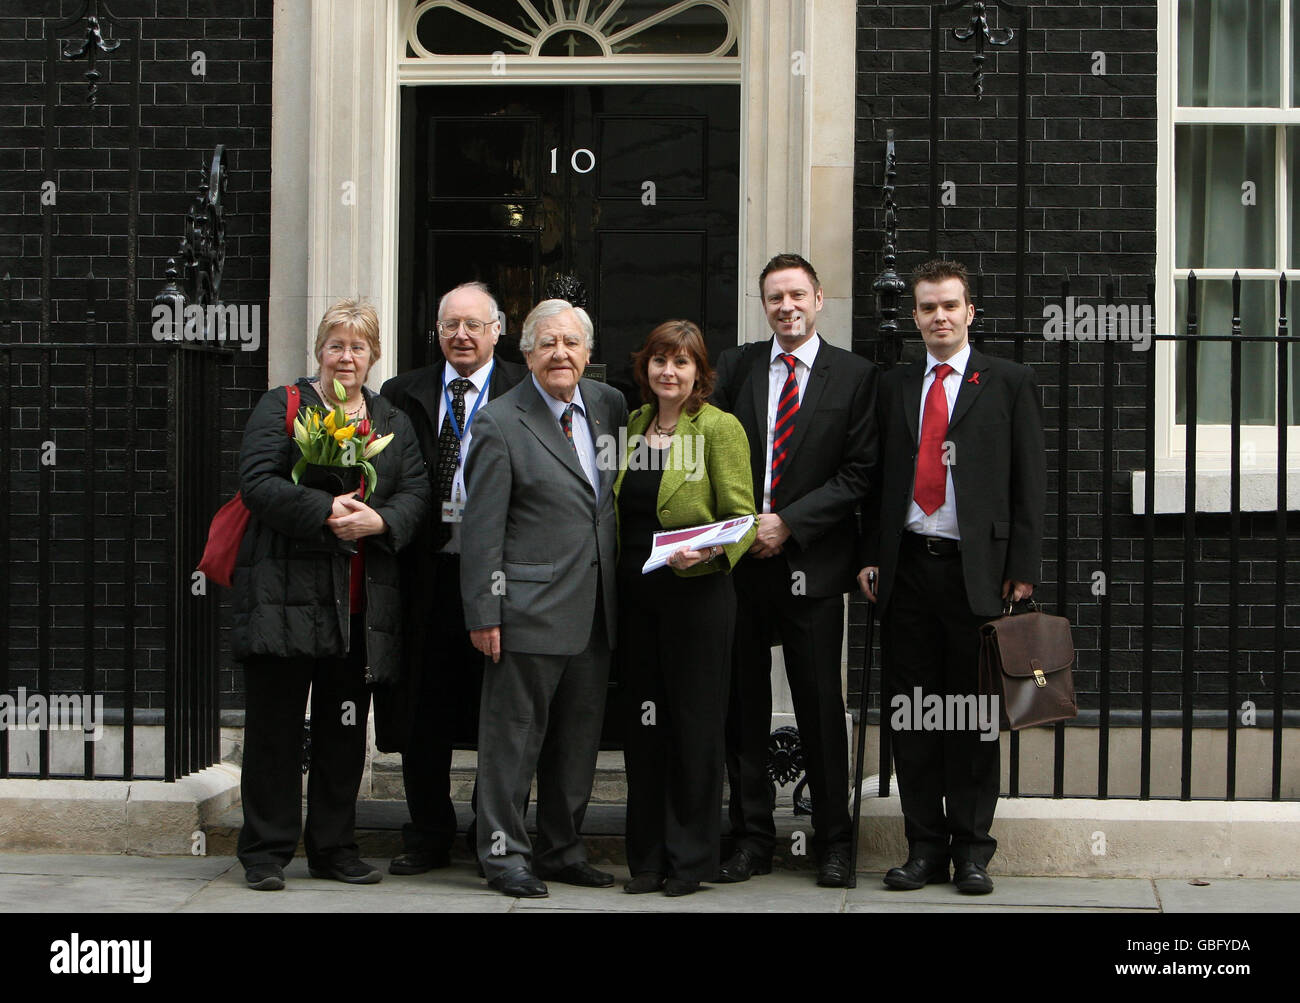 Members of the Haemophilia Society (left to right) Sue Threakall, MP for Knowsley South; Eddie O'Hara, Patron of the Haemophilia Society; Lord Morris of Manchester; the Society Chair, Liz Rizzuto; Chief Executive Chris James and Trustee Matt Gregory deliver a copy of the Archer report into contaminated blood to Ten Downing Street, Westminster, London. Stock Photo